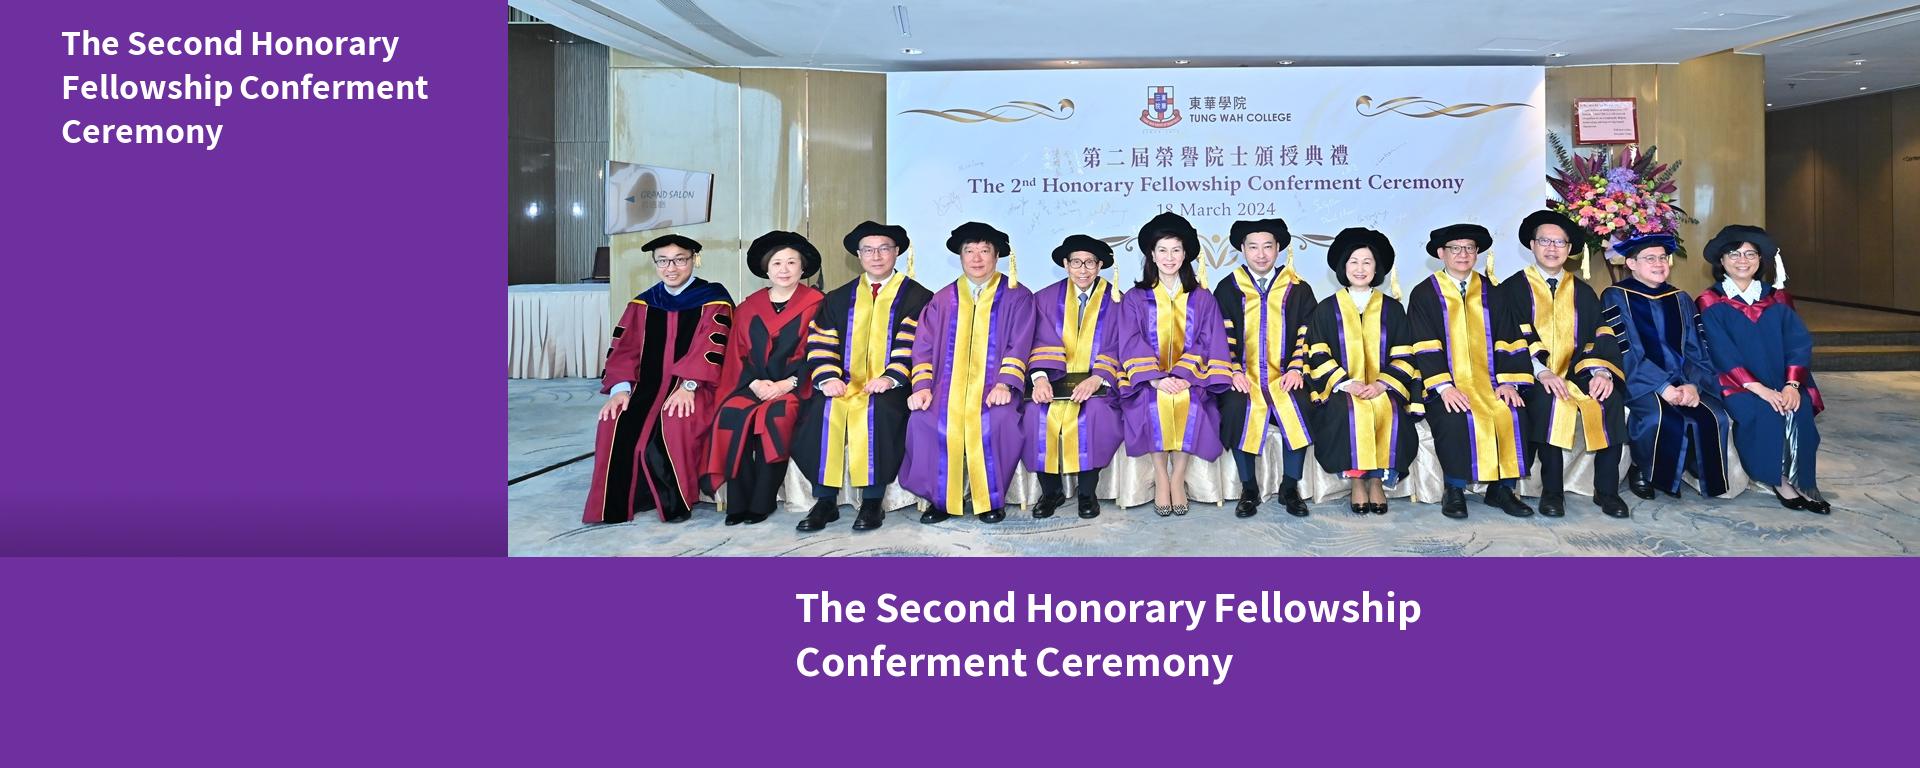 The Second Honorary Fellowship Conferment Ceremony